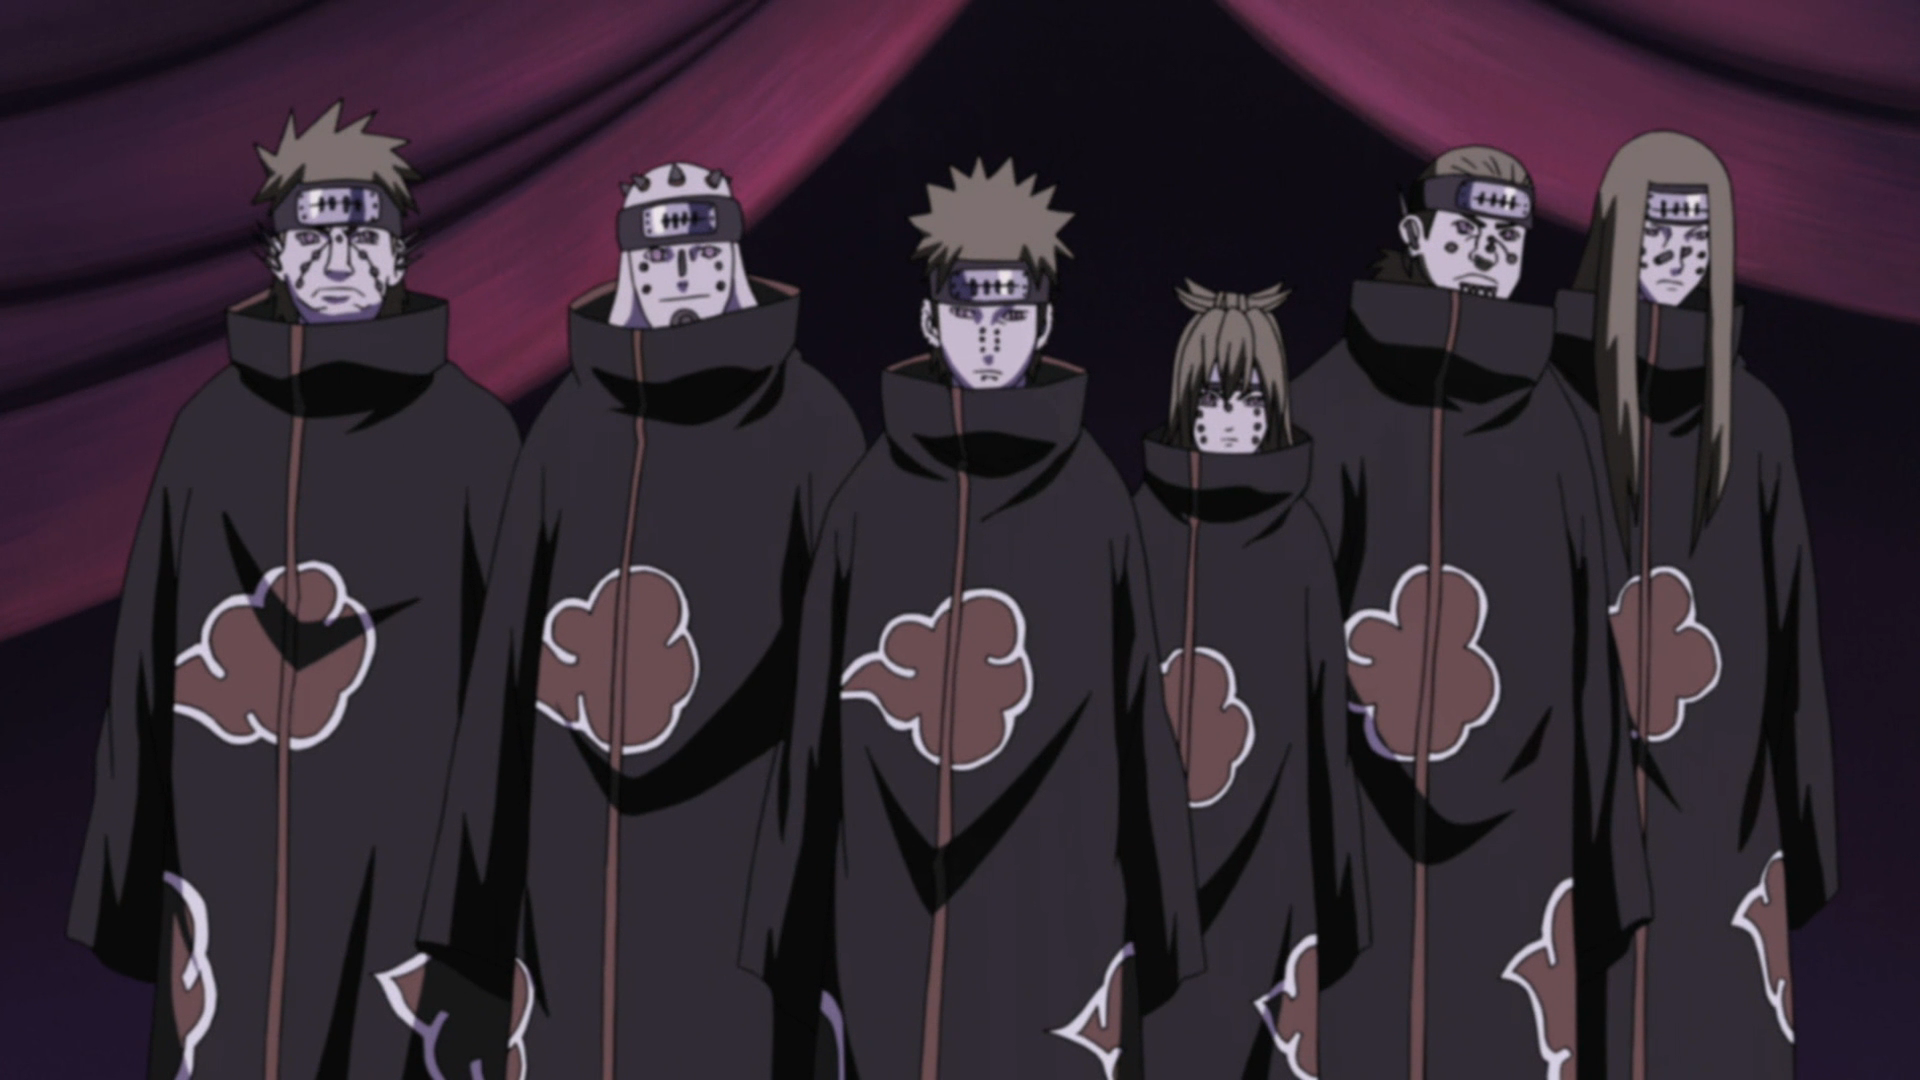 Naruto: The 10 Best Episodes Of The Pain's Assault Arc (According To IMDb),  Ranked